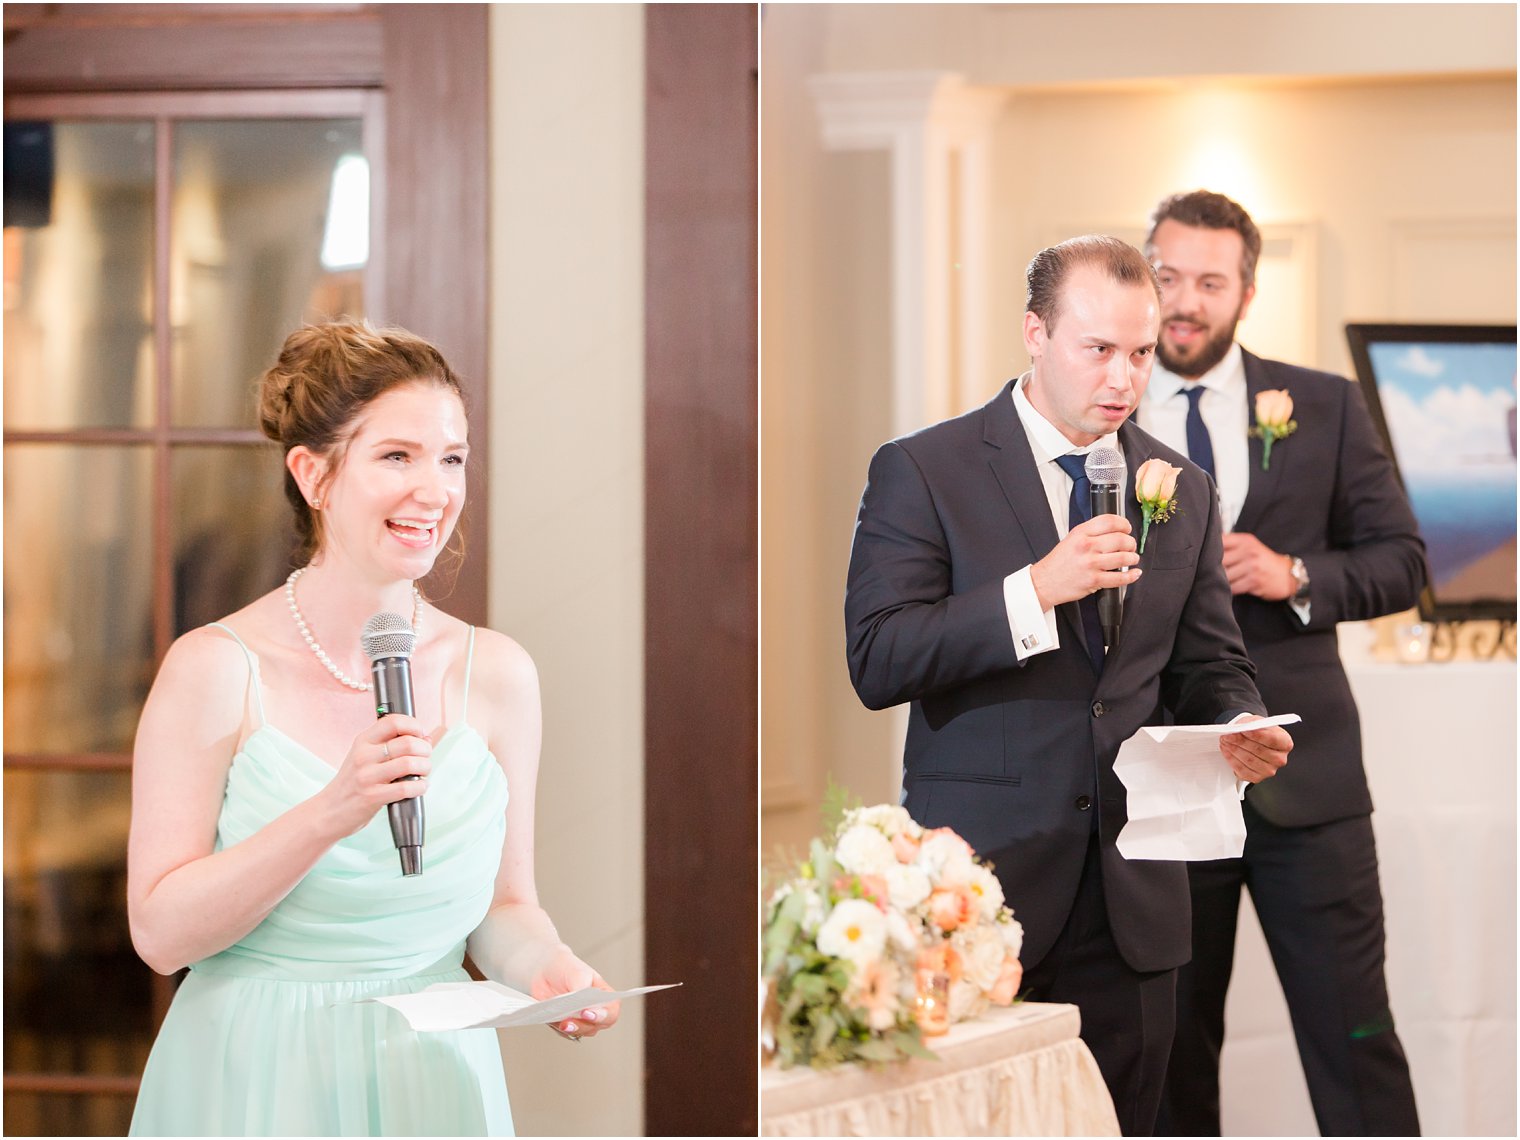 wedding toasts during reception at Lake Mohawk Country Club